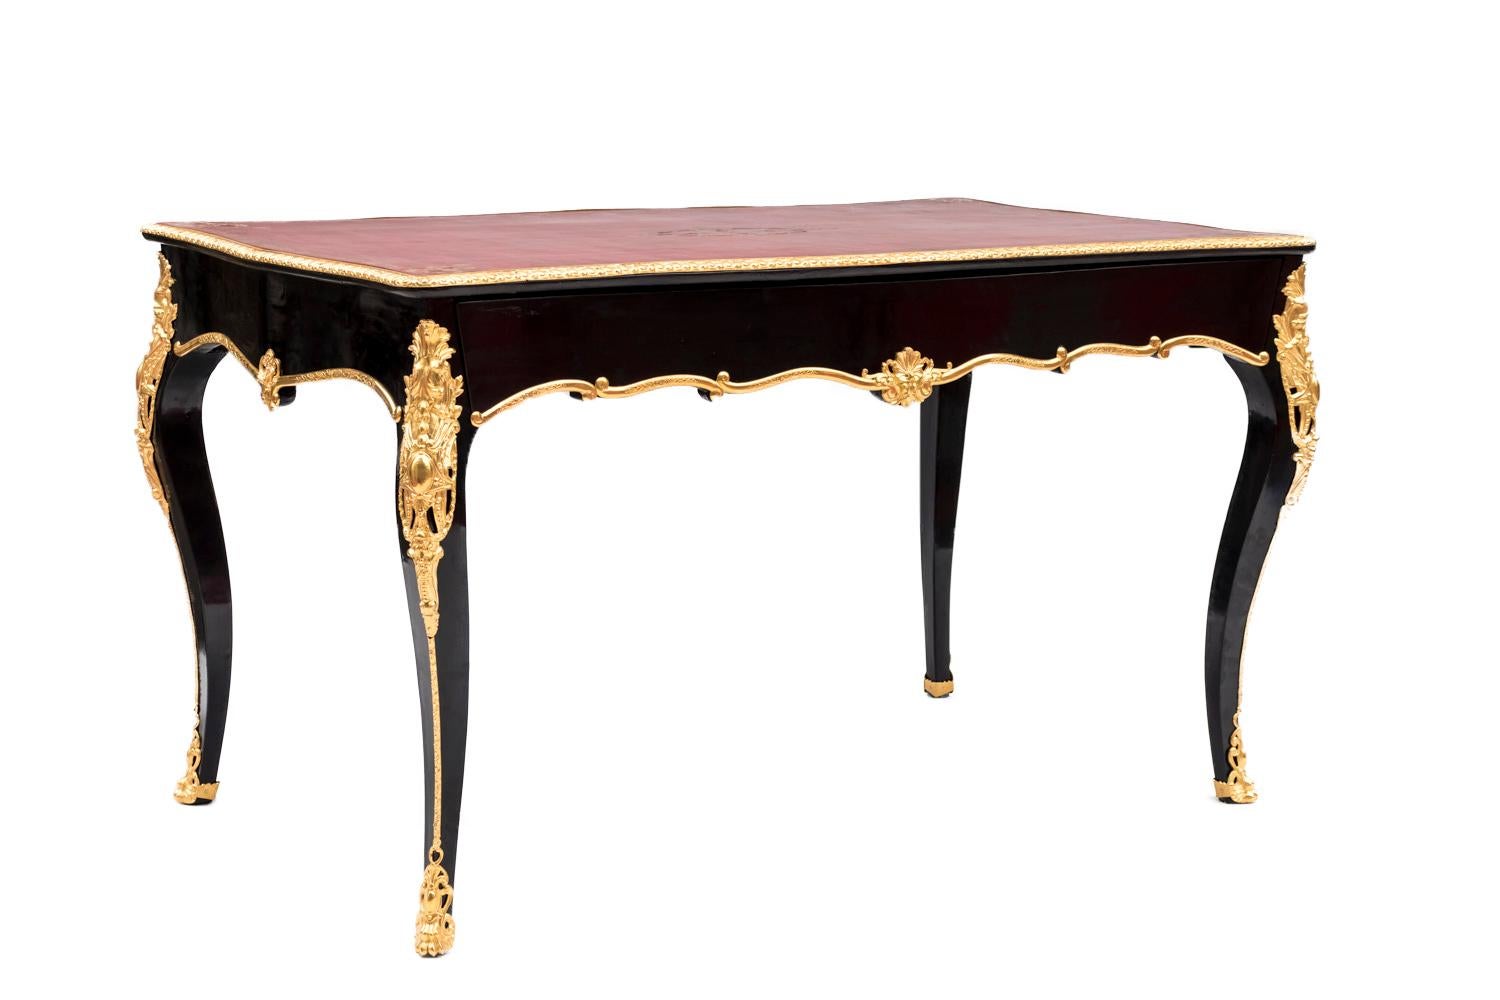 Small Louis XV style black lacquered writing desk opening by one apron’s drawer, standing on four cabriole legs. Scalloped shaped apron.
Ornamentation of chiselled and gilt bronze on angles with a decor of blind cartouche surrounded by palm leaves,